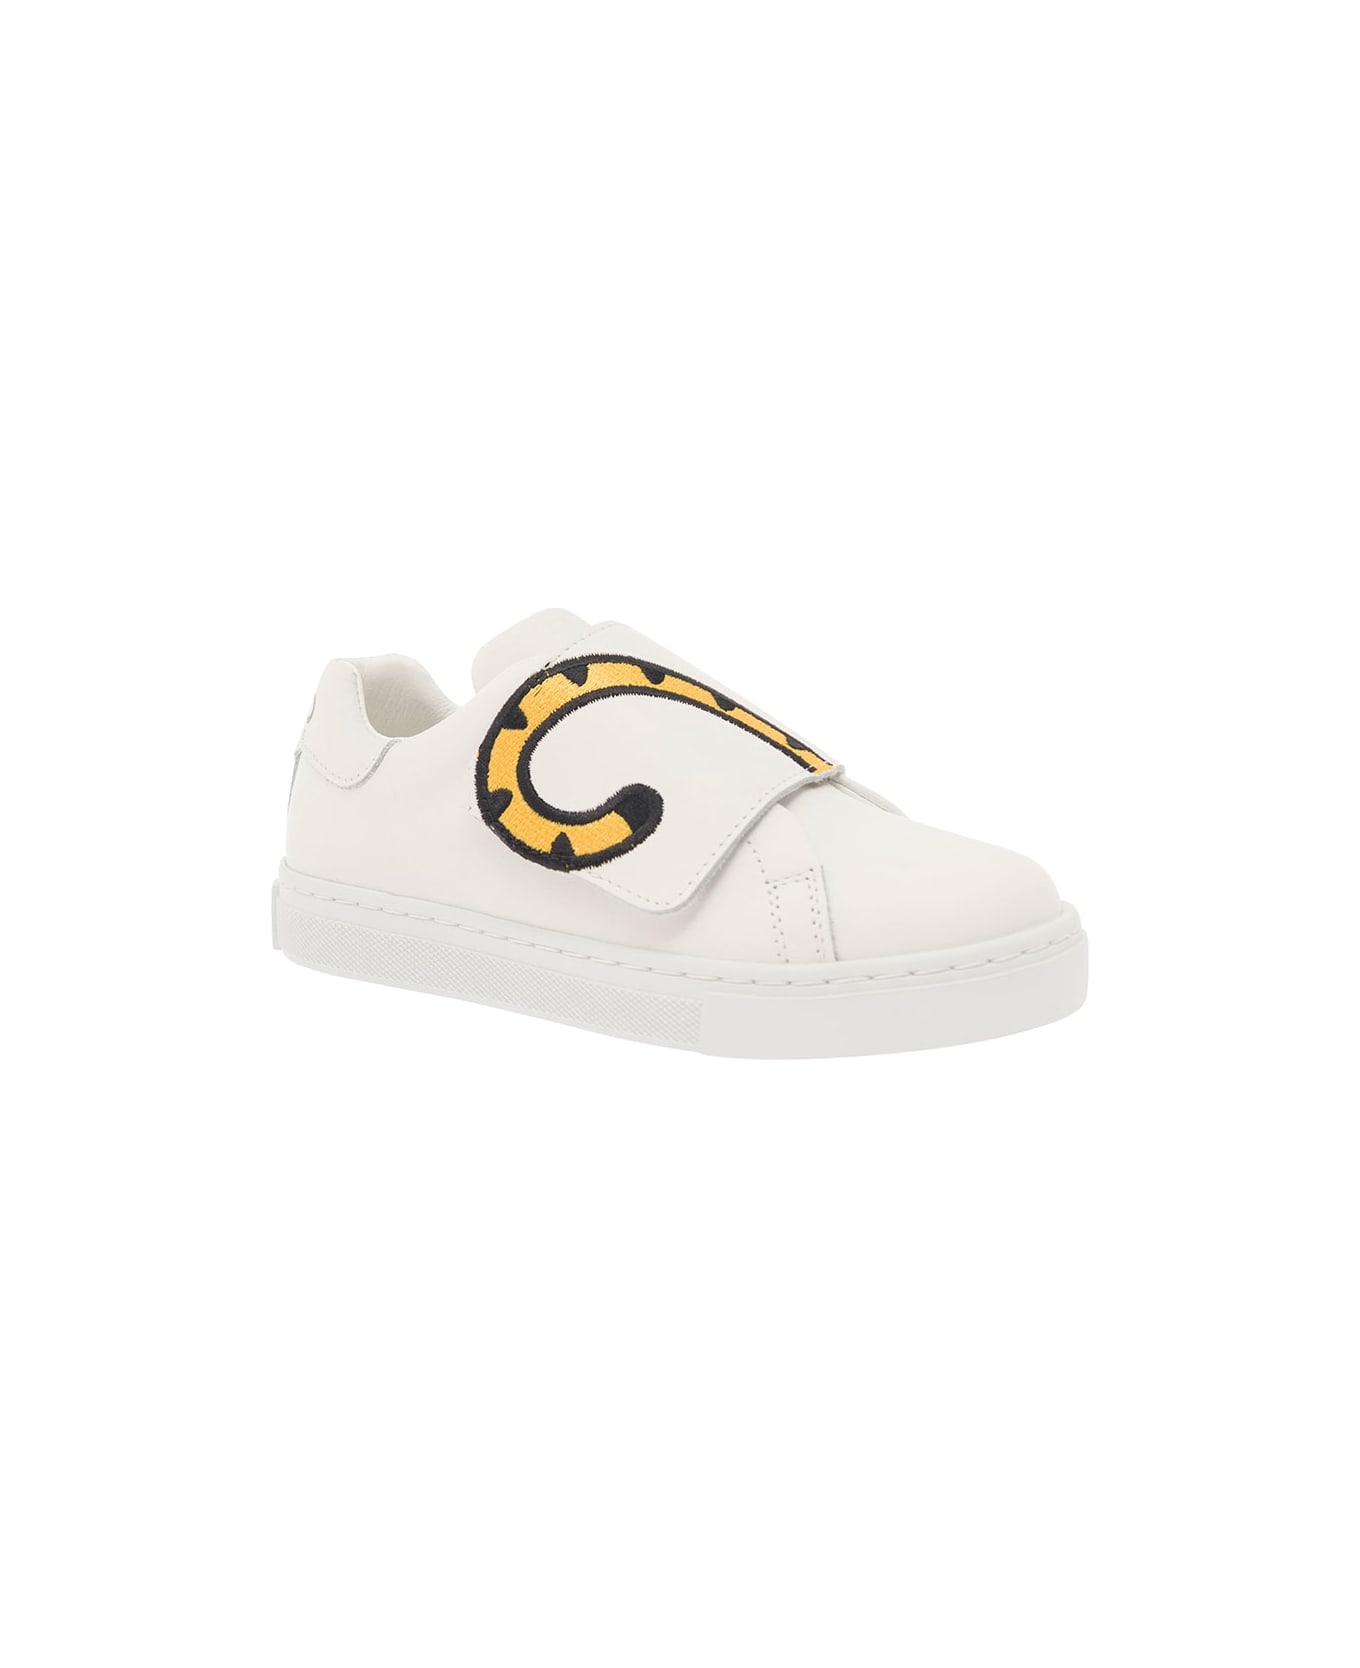 Kenzo Kids White Sneakers With Embroidered Tiger In Calf Leather Boy - White シューズ